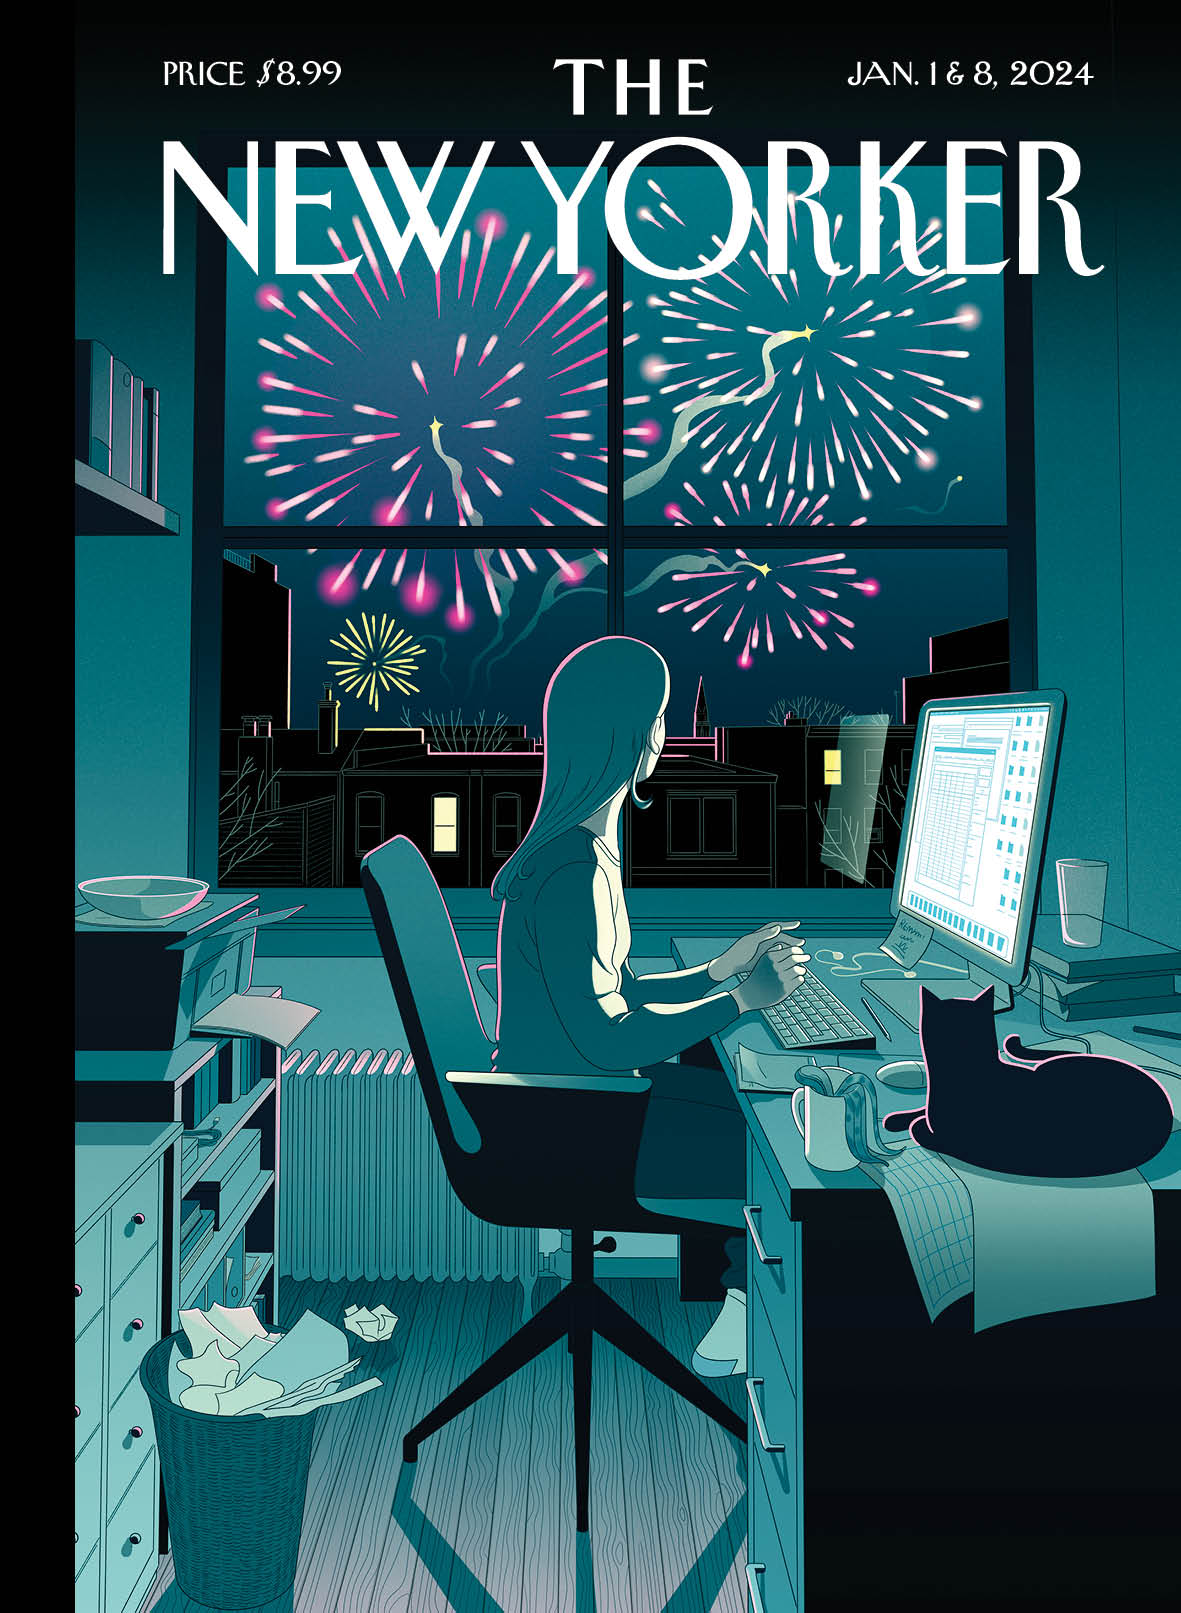 The New Yorker's cover with Bianca Bagnarelli's artwork: 